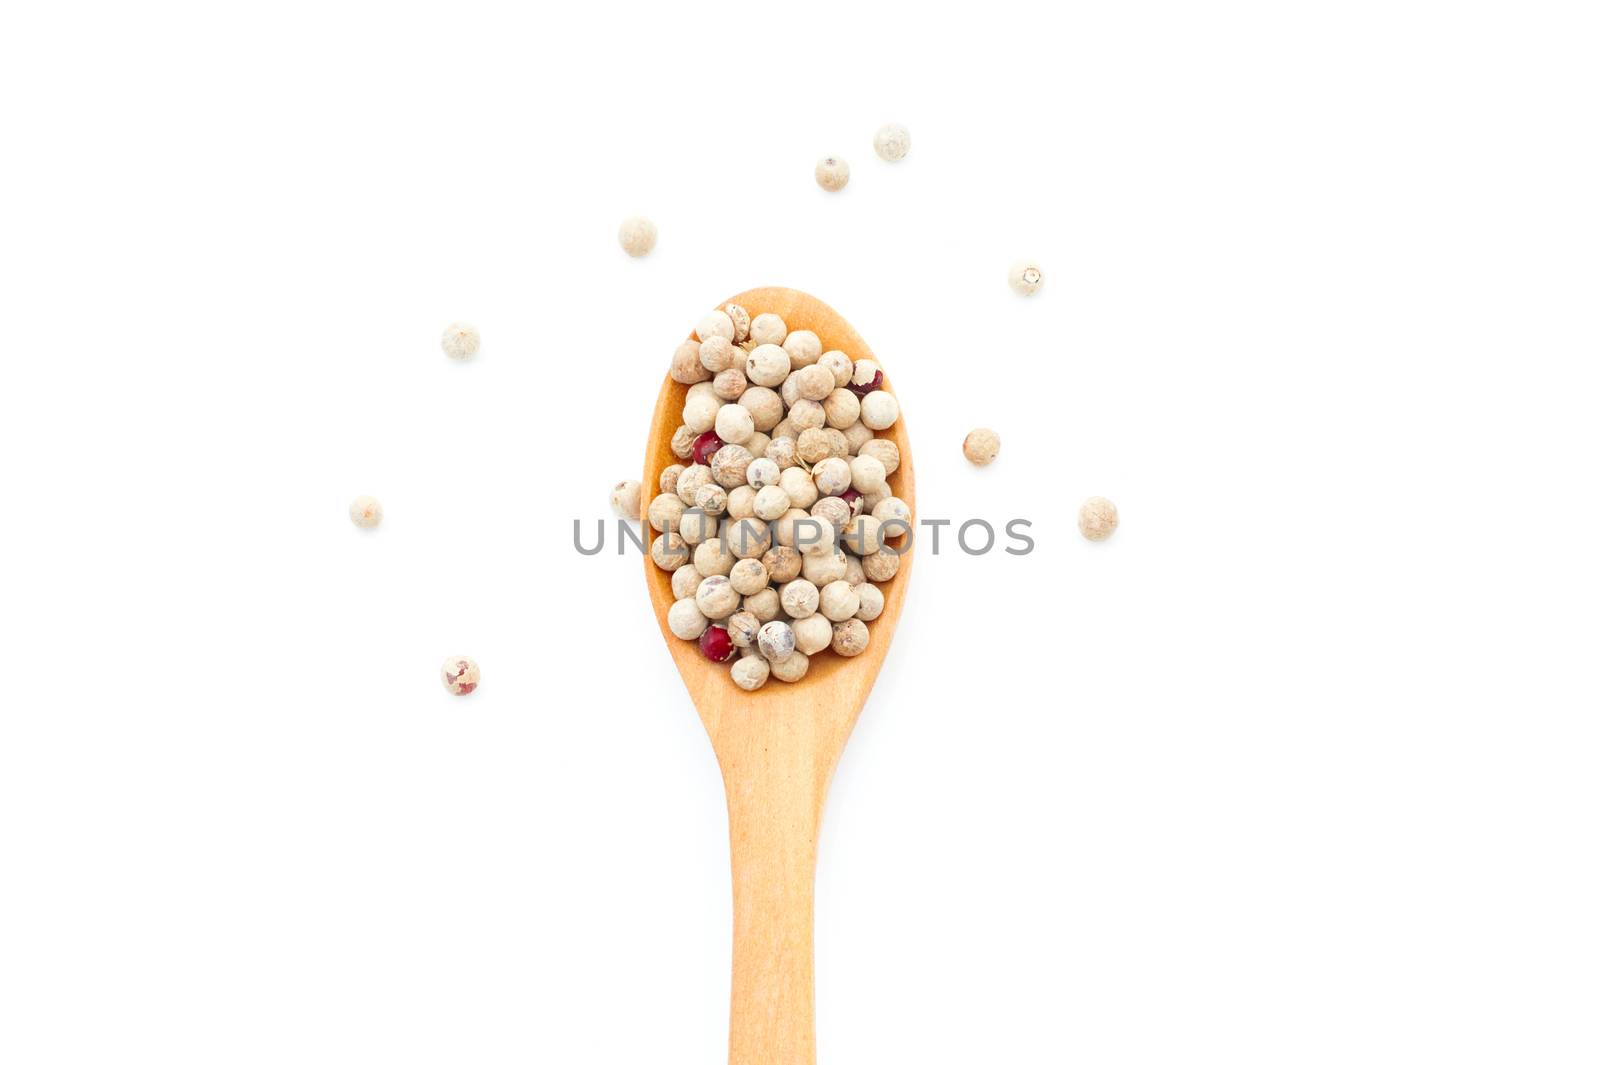 Pepper spices in a wooden spoon on a white background   by sompongtom